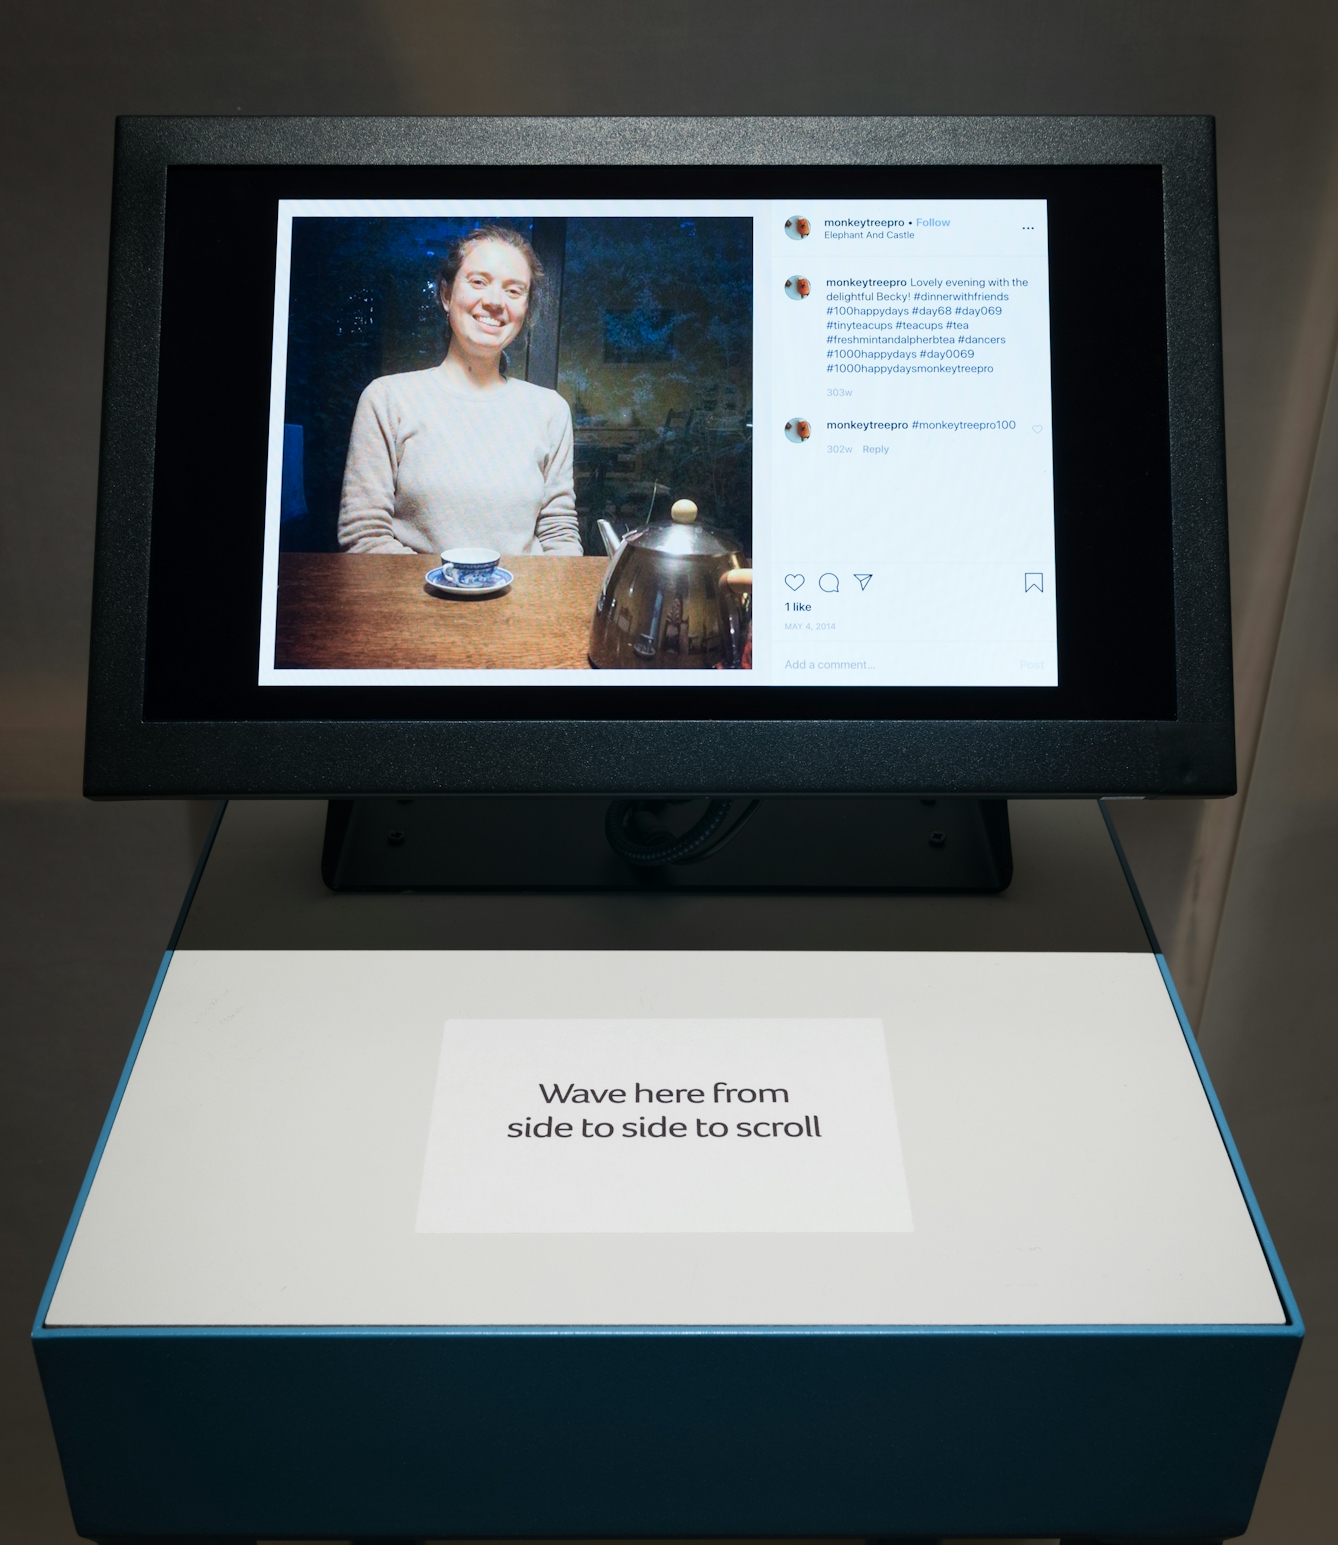 Photograph in an exhibition gallery apace, showing a computer screen mounted on a gallery plinth. On the screen is an image of a young woman seated at a wooden table with a blue china teacup and saucer in front of her and a shiny metal teapot. She is smiling to the camera. To the right of the image is the context graphics of an Instagram comments section include 3 comments. On a label stuck to the plinth in front of the screen are the words, 'Wave here from side to side to scroll'.